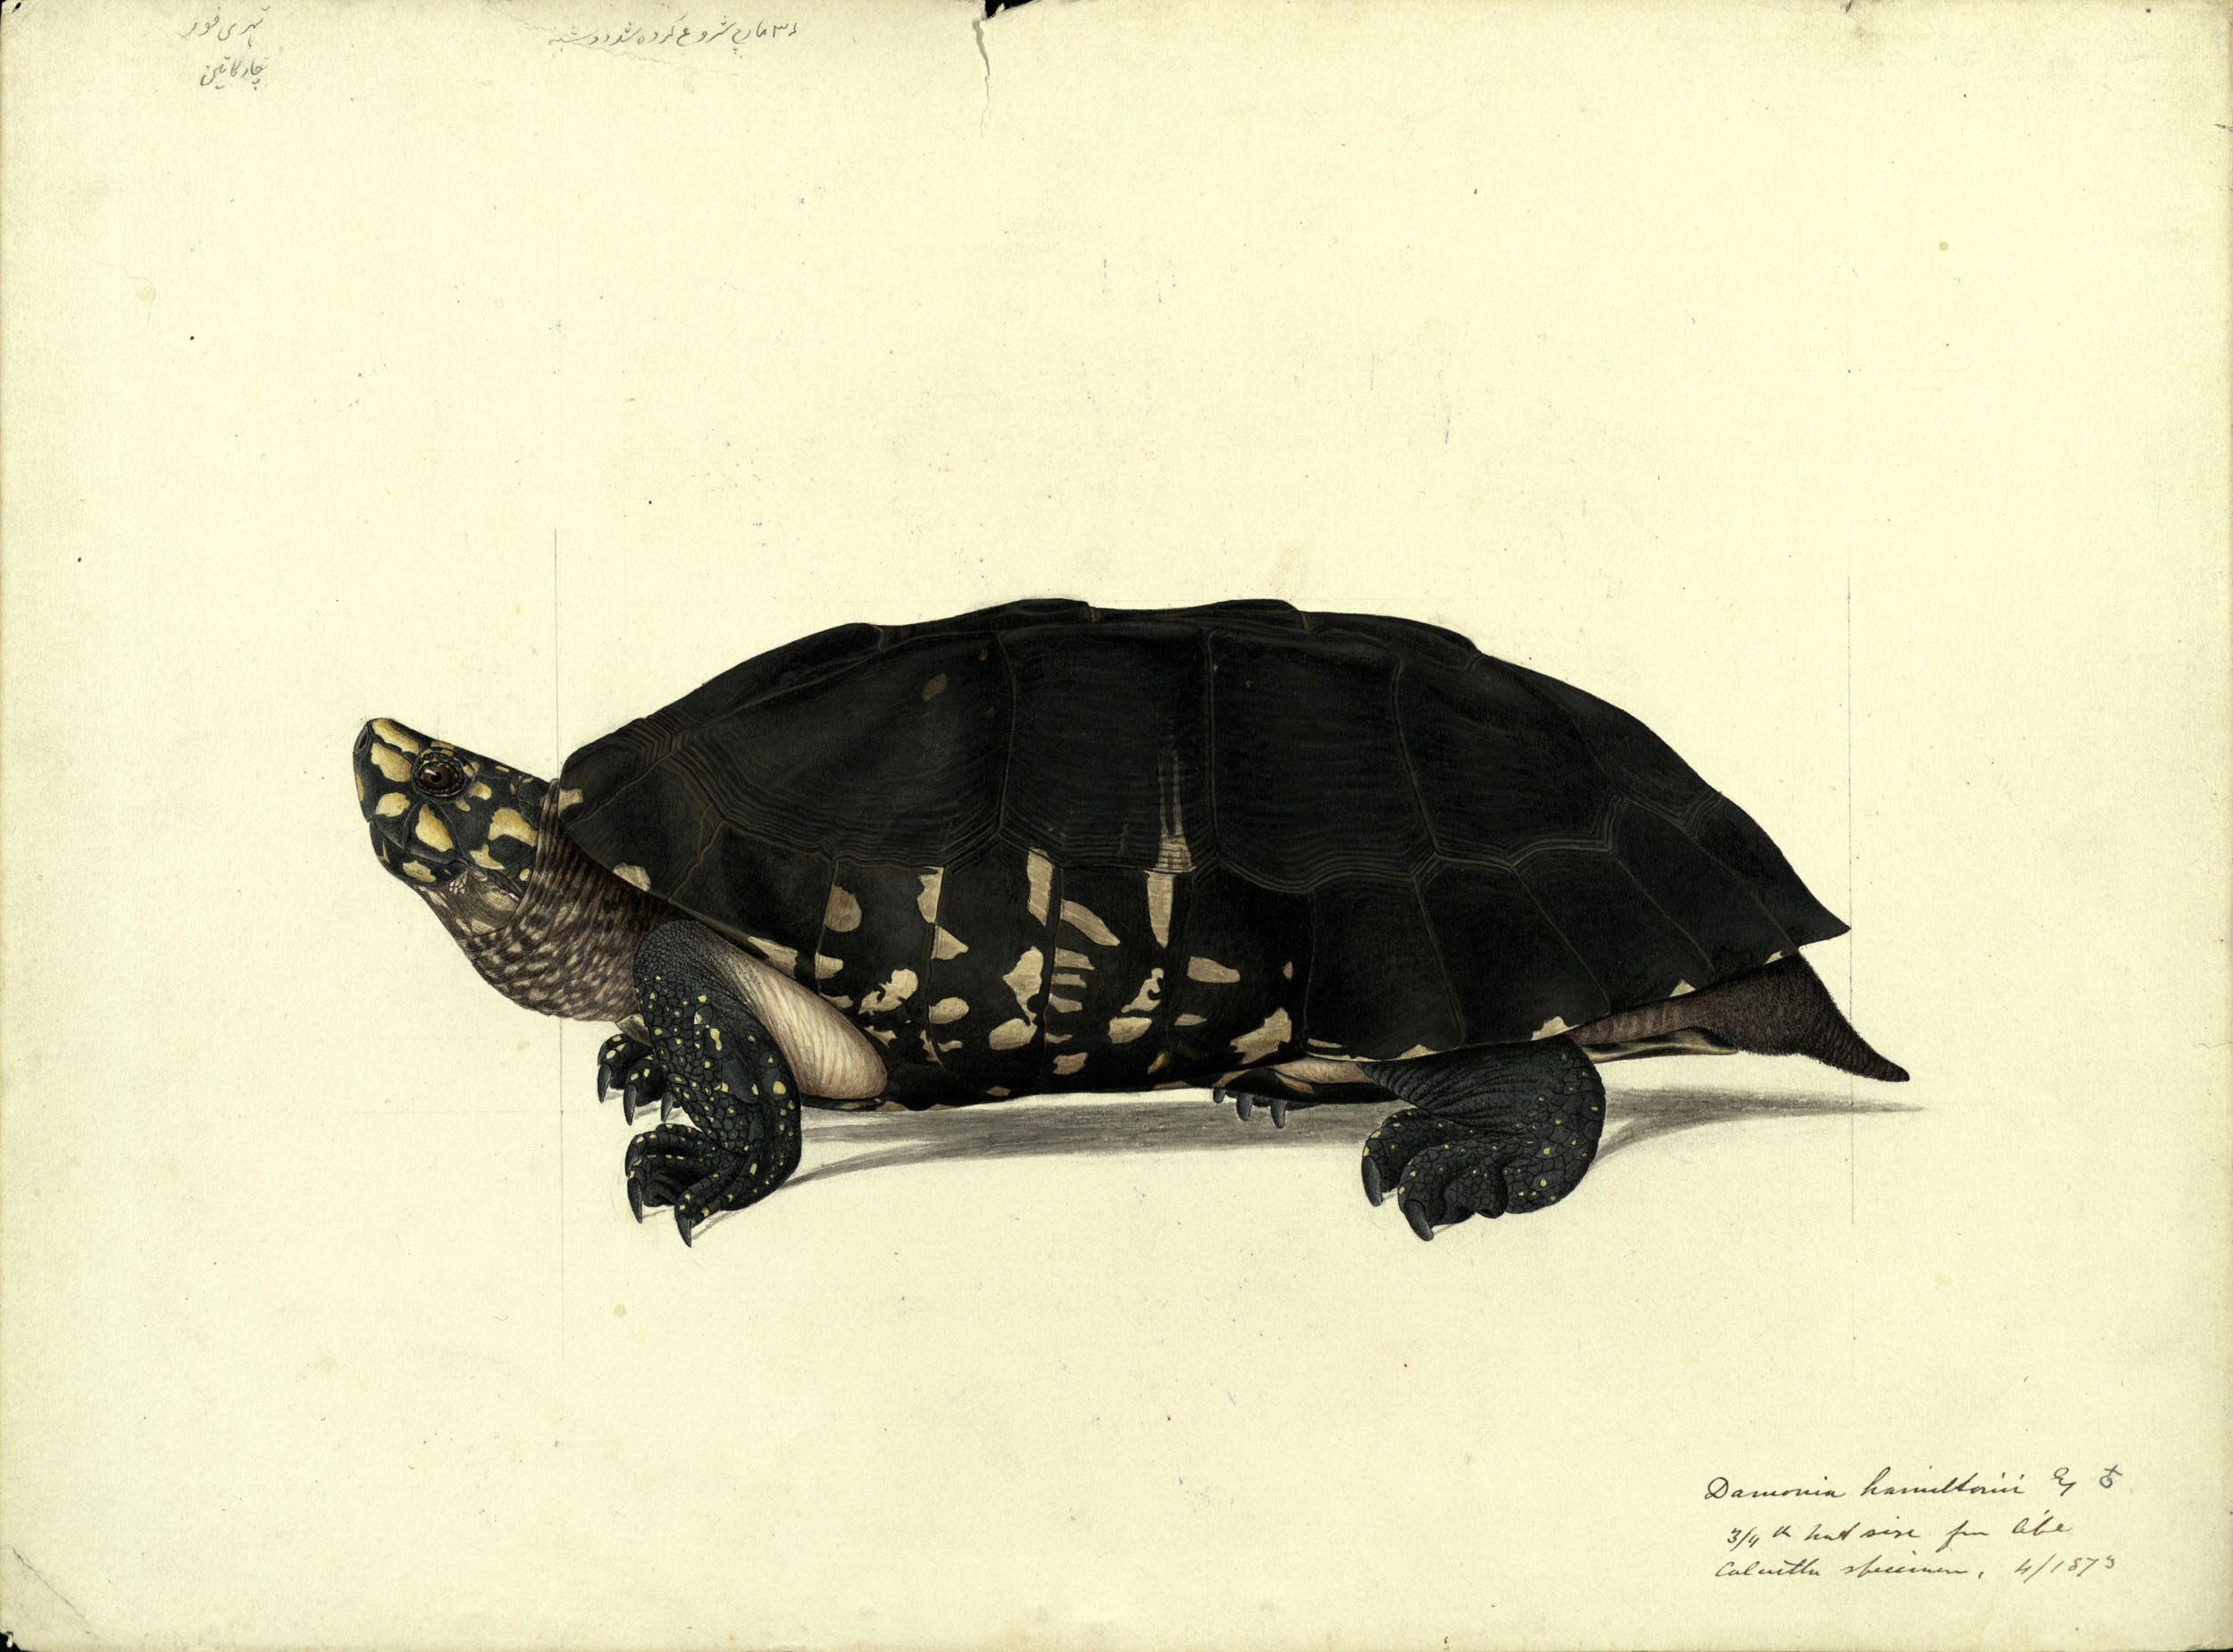 A black pond turtle by John Anderson (ms30413)